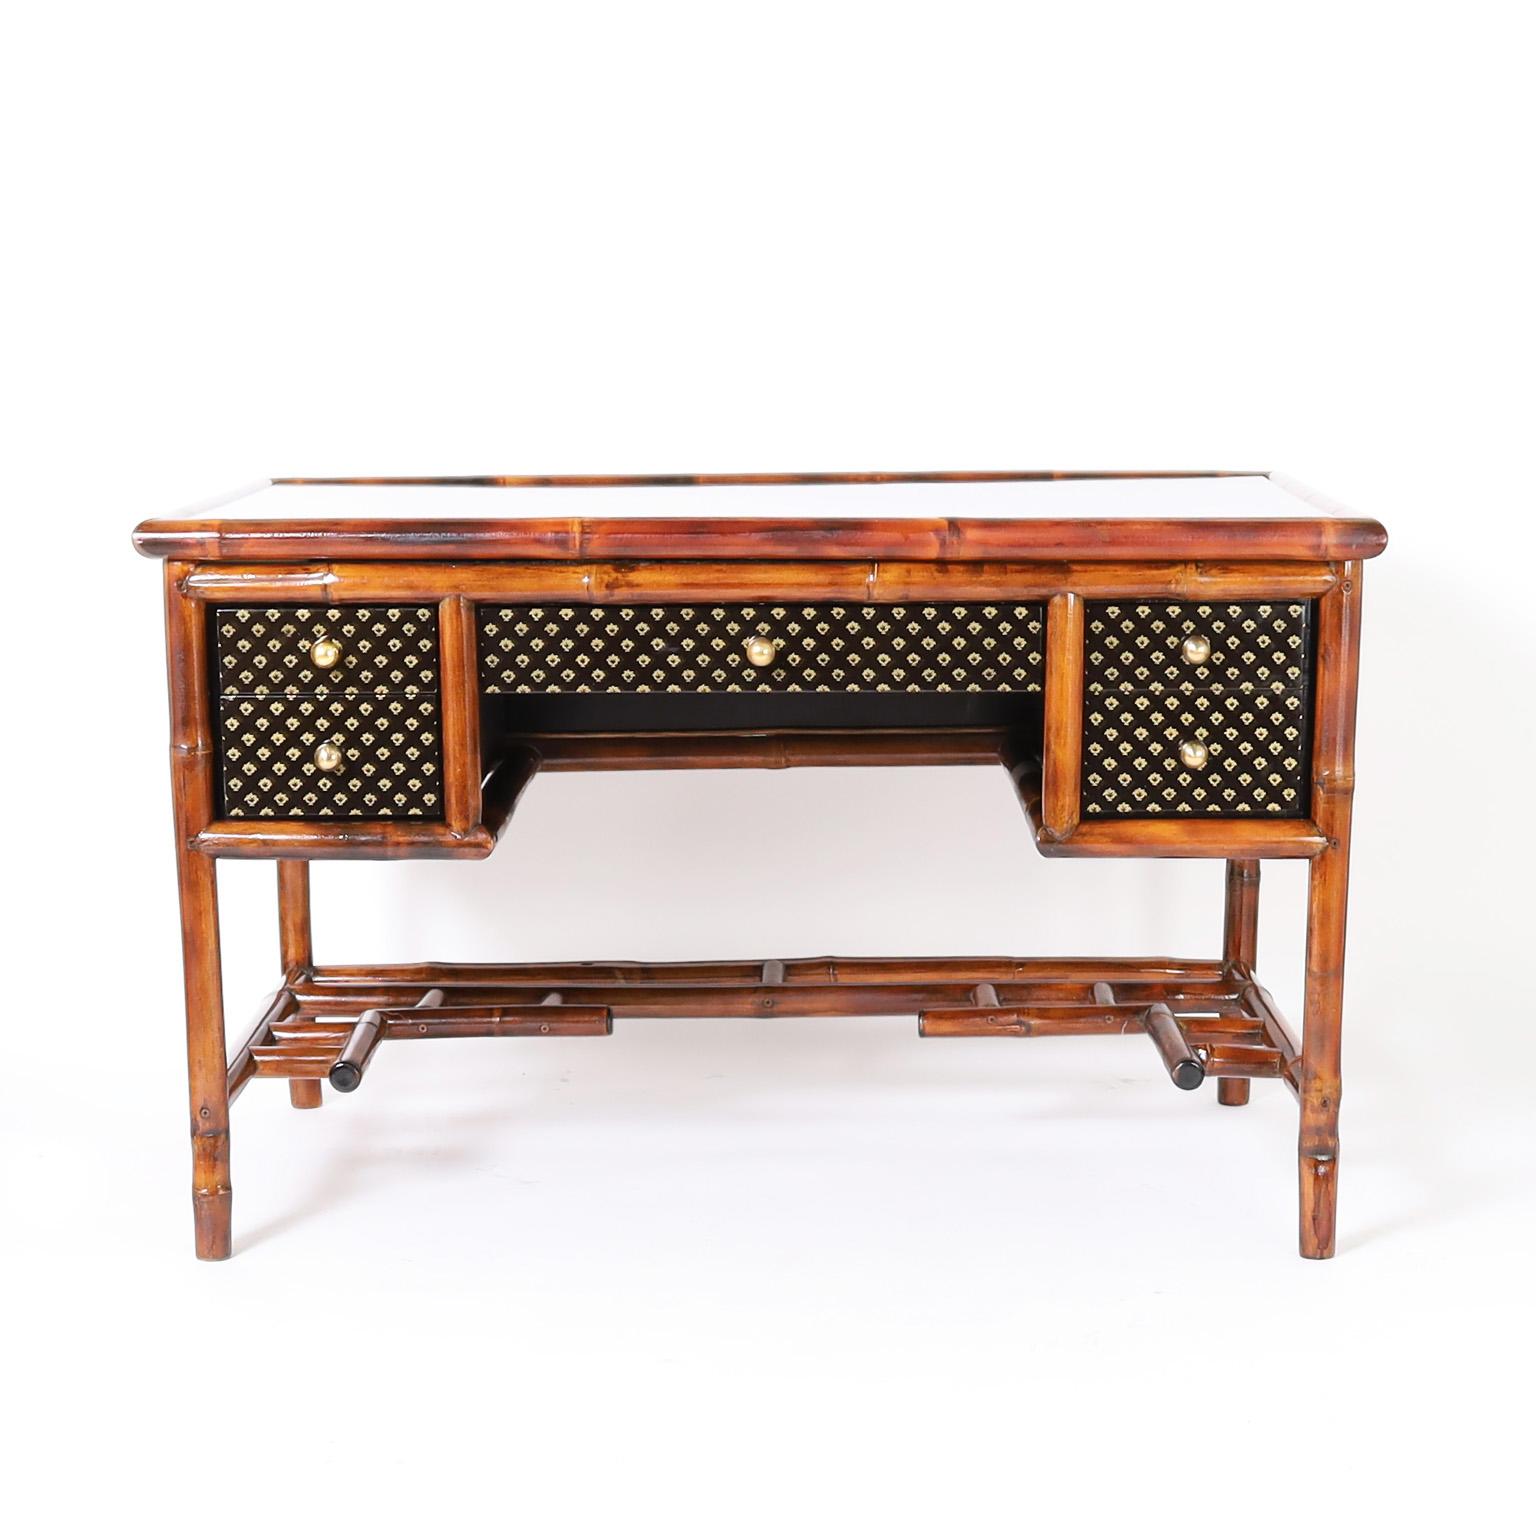 Mid century desk crafted in bamboo and featuring lacquered panels on the top under glass, sides, back and front having five drawers with brass hardware and Chinese Chippendale style stretcher below.